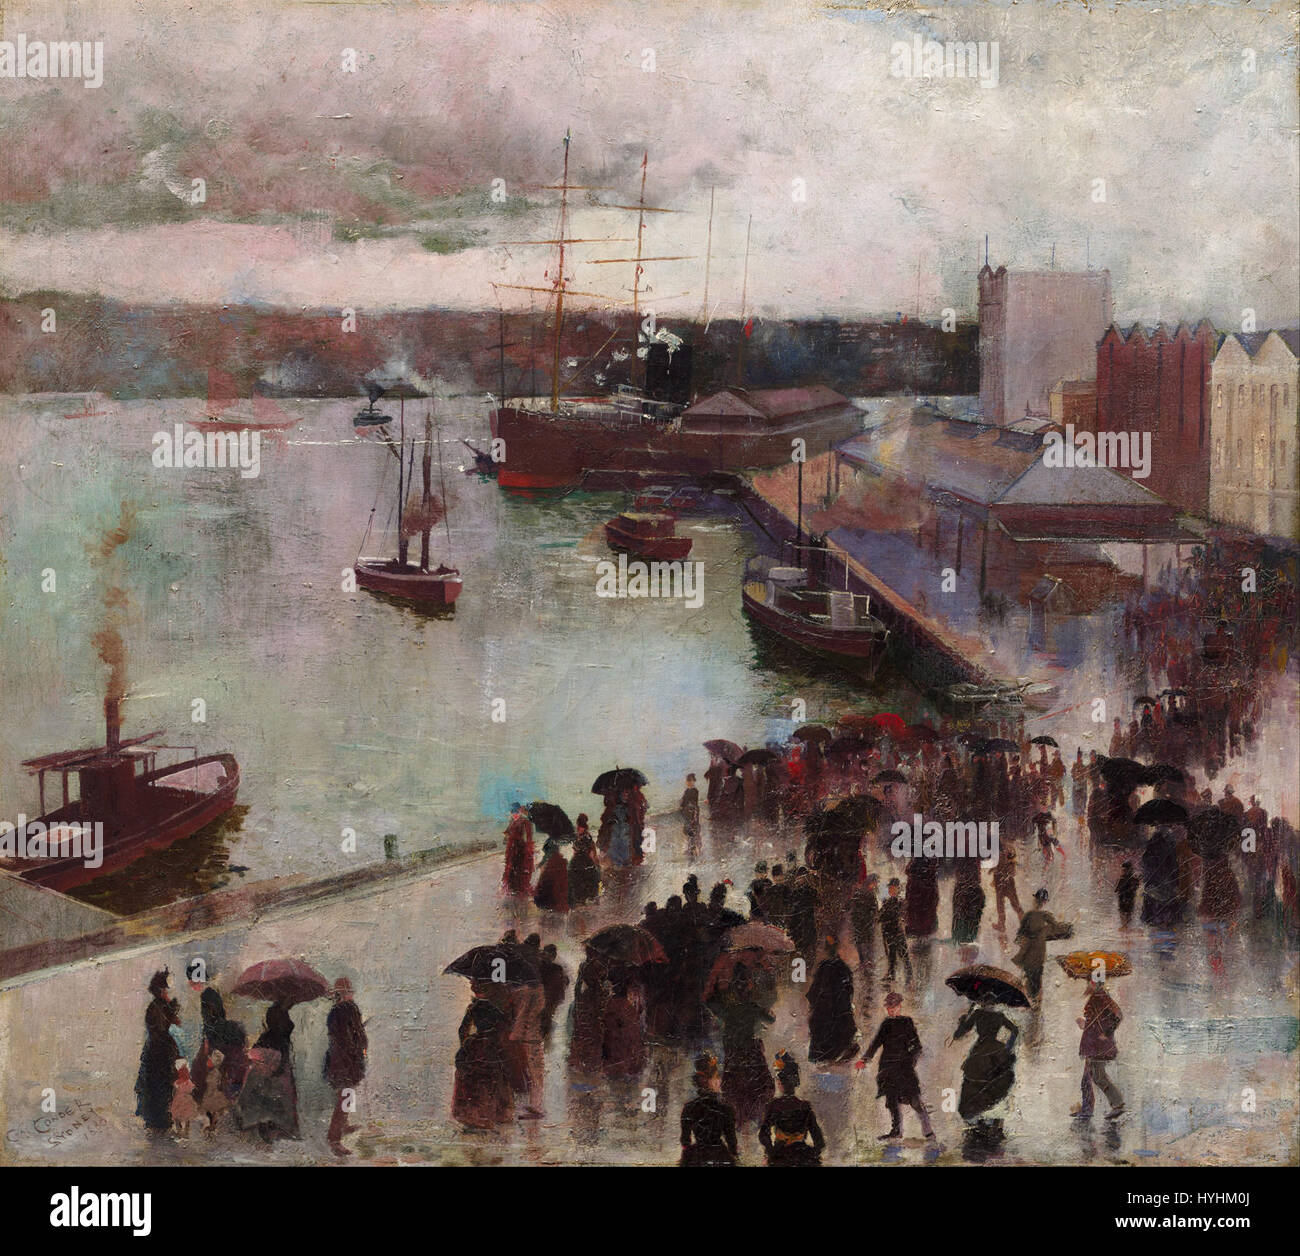 Charles Conder   Departure of the Orient   Circular Quay   Google Art Project Stock Photo